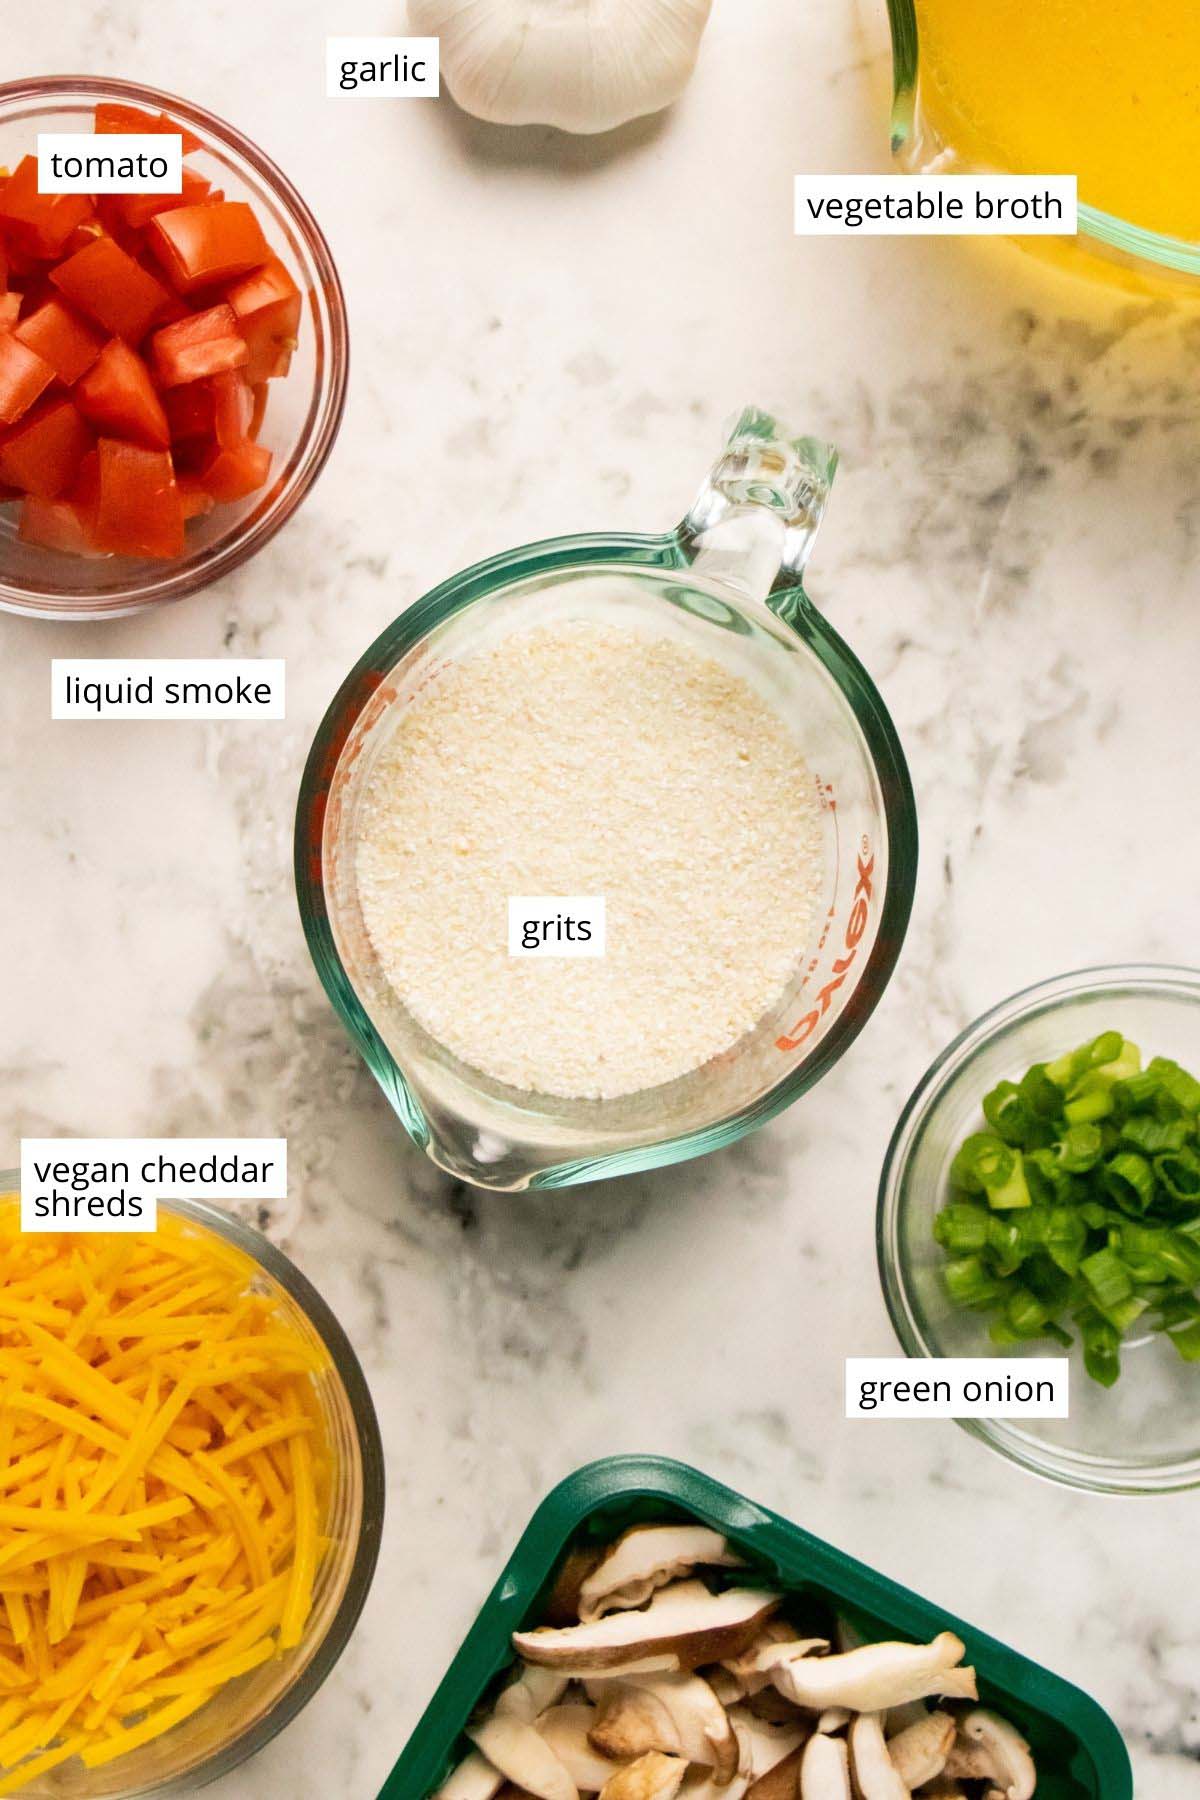 grits, vegan cheese, veggies, and other ingredients in cups and bowls on a marble tabletop